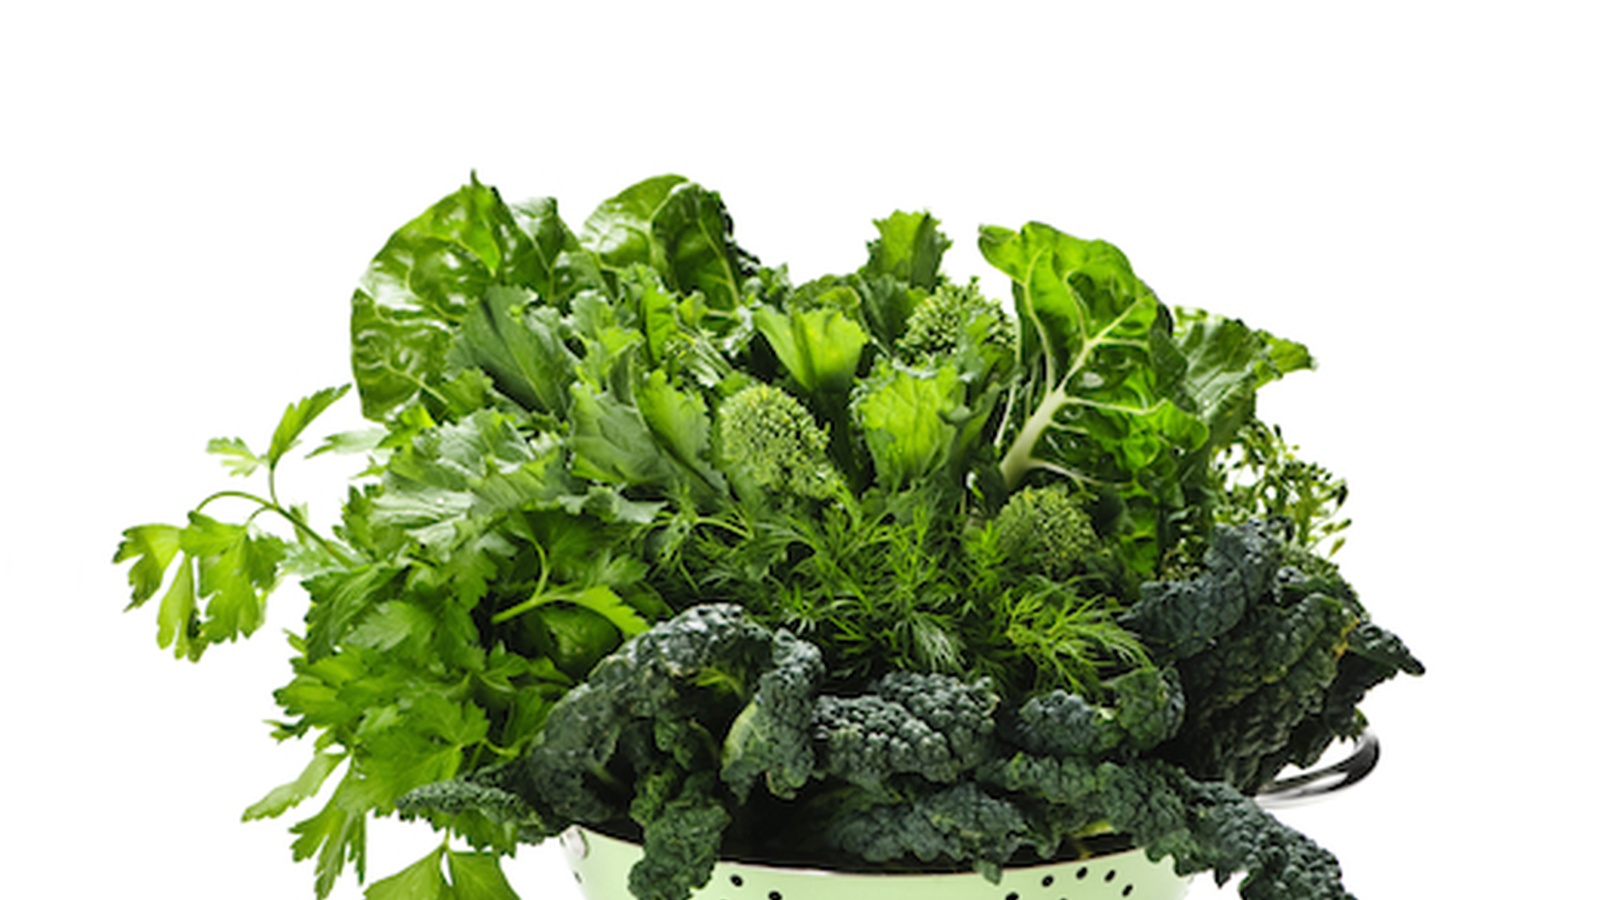 You'll Never Guess What Veggie Just Beat Kale!